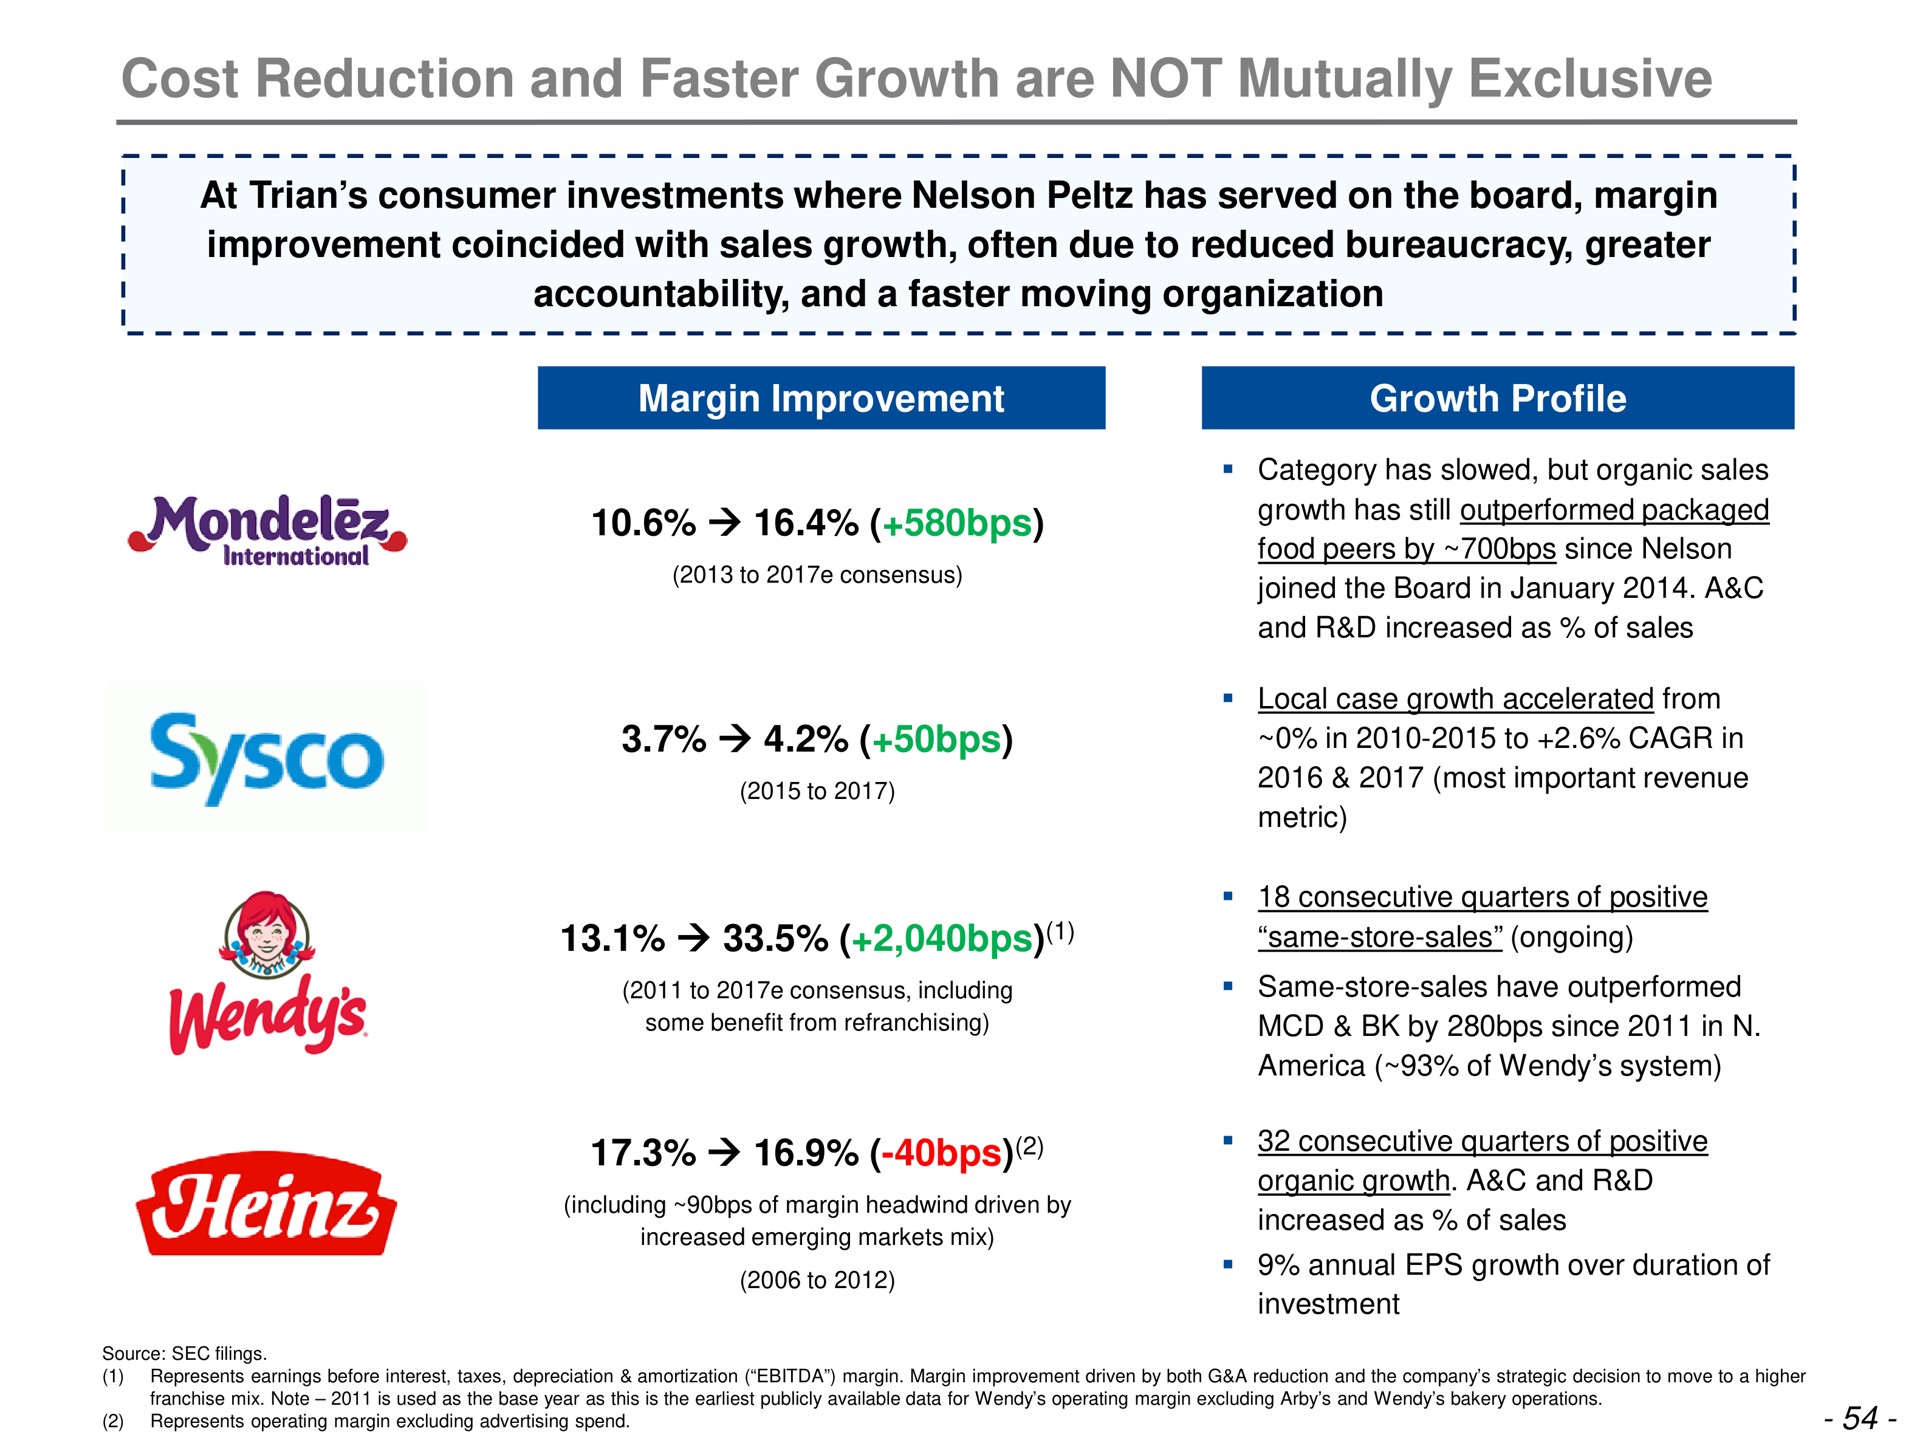 cost reduction and faster growth are not mutually exclusive | Trian Partners